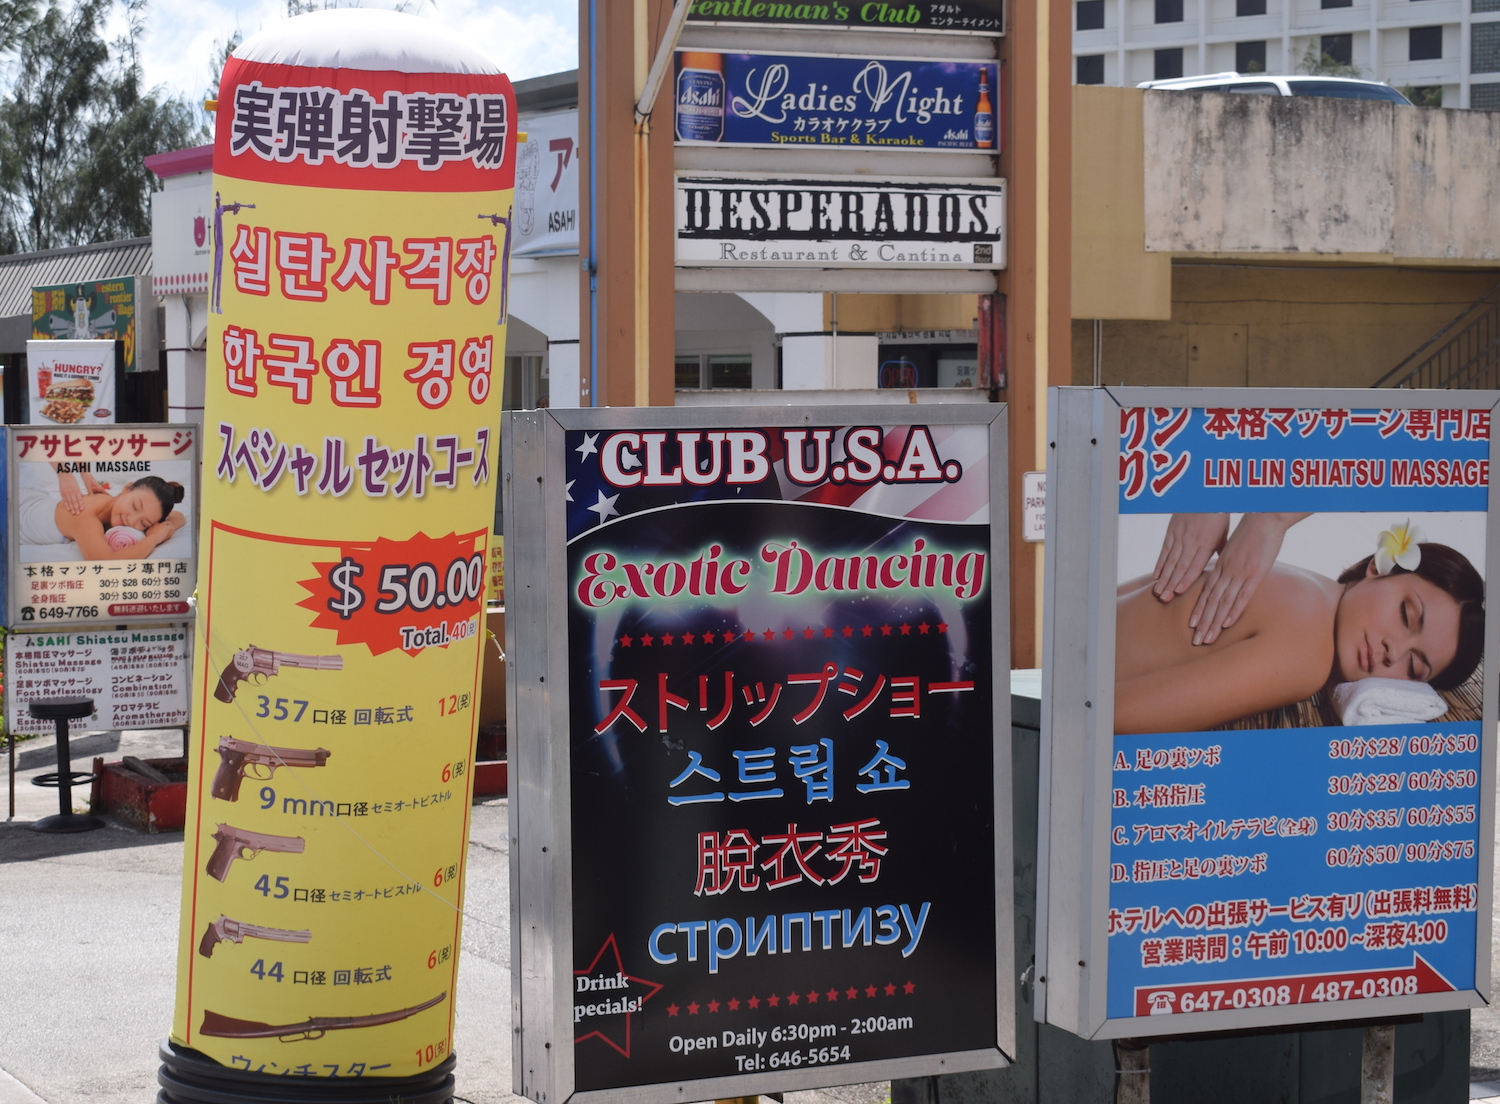 Adverts for guns and strippers in Guam